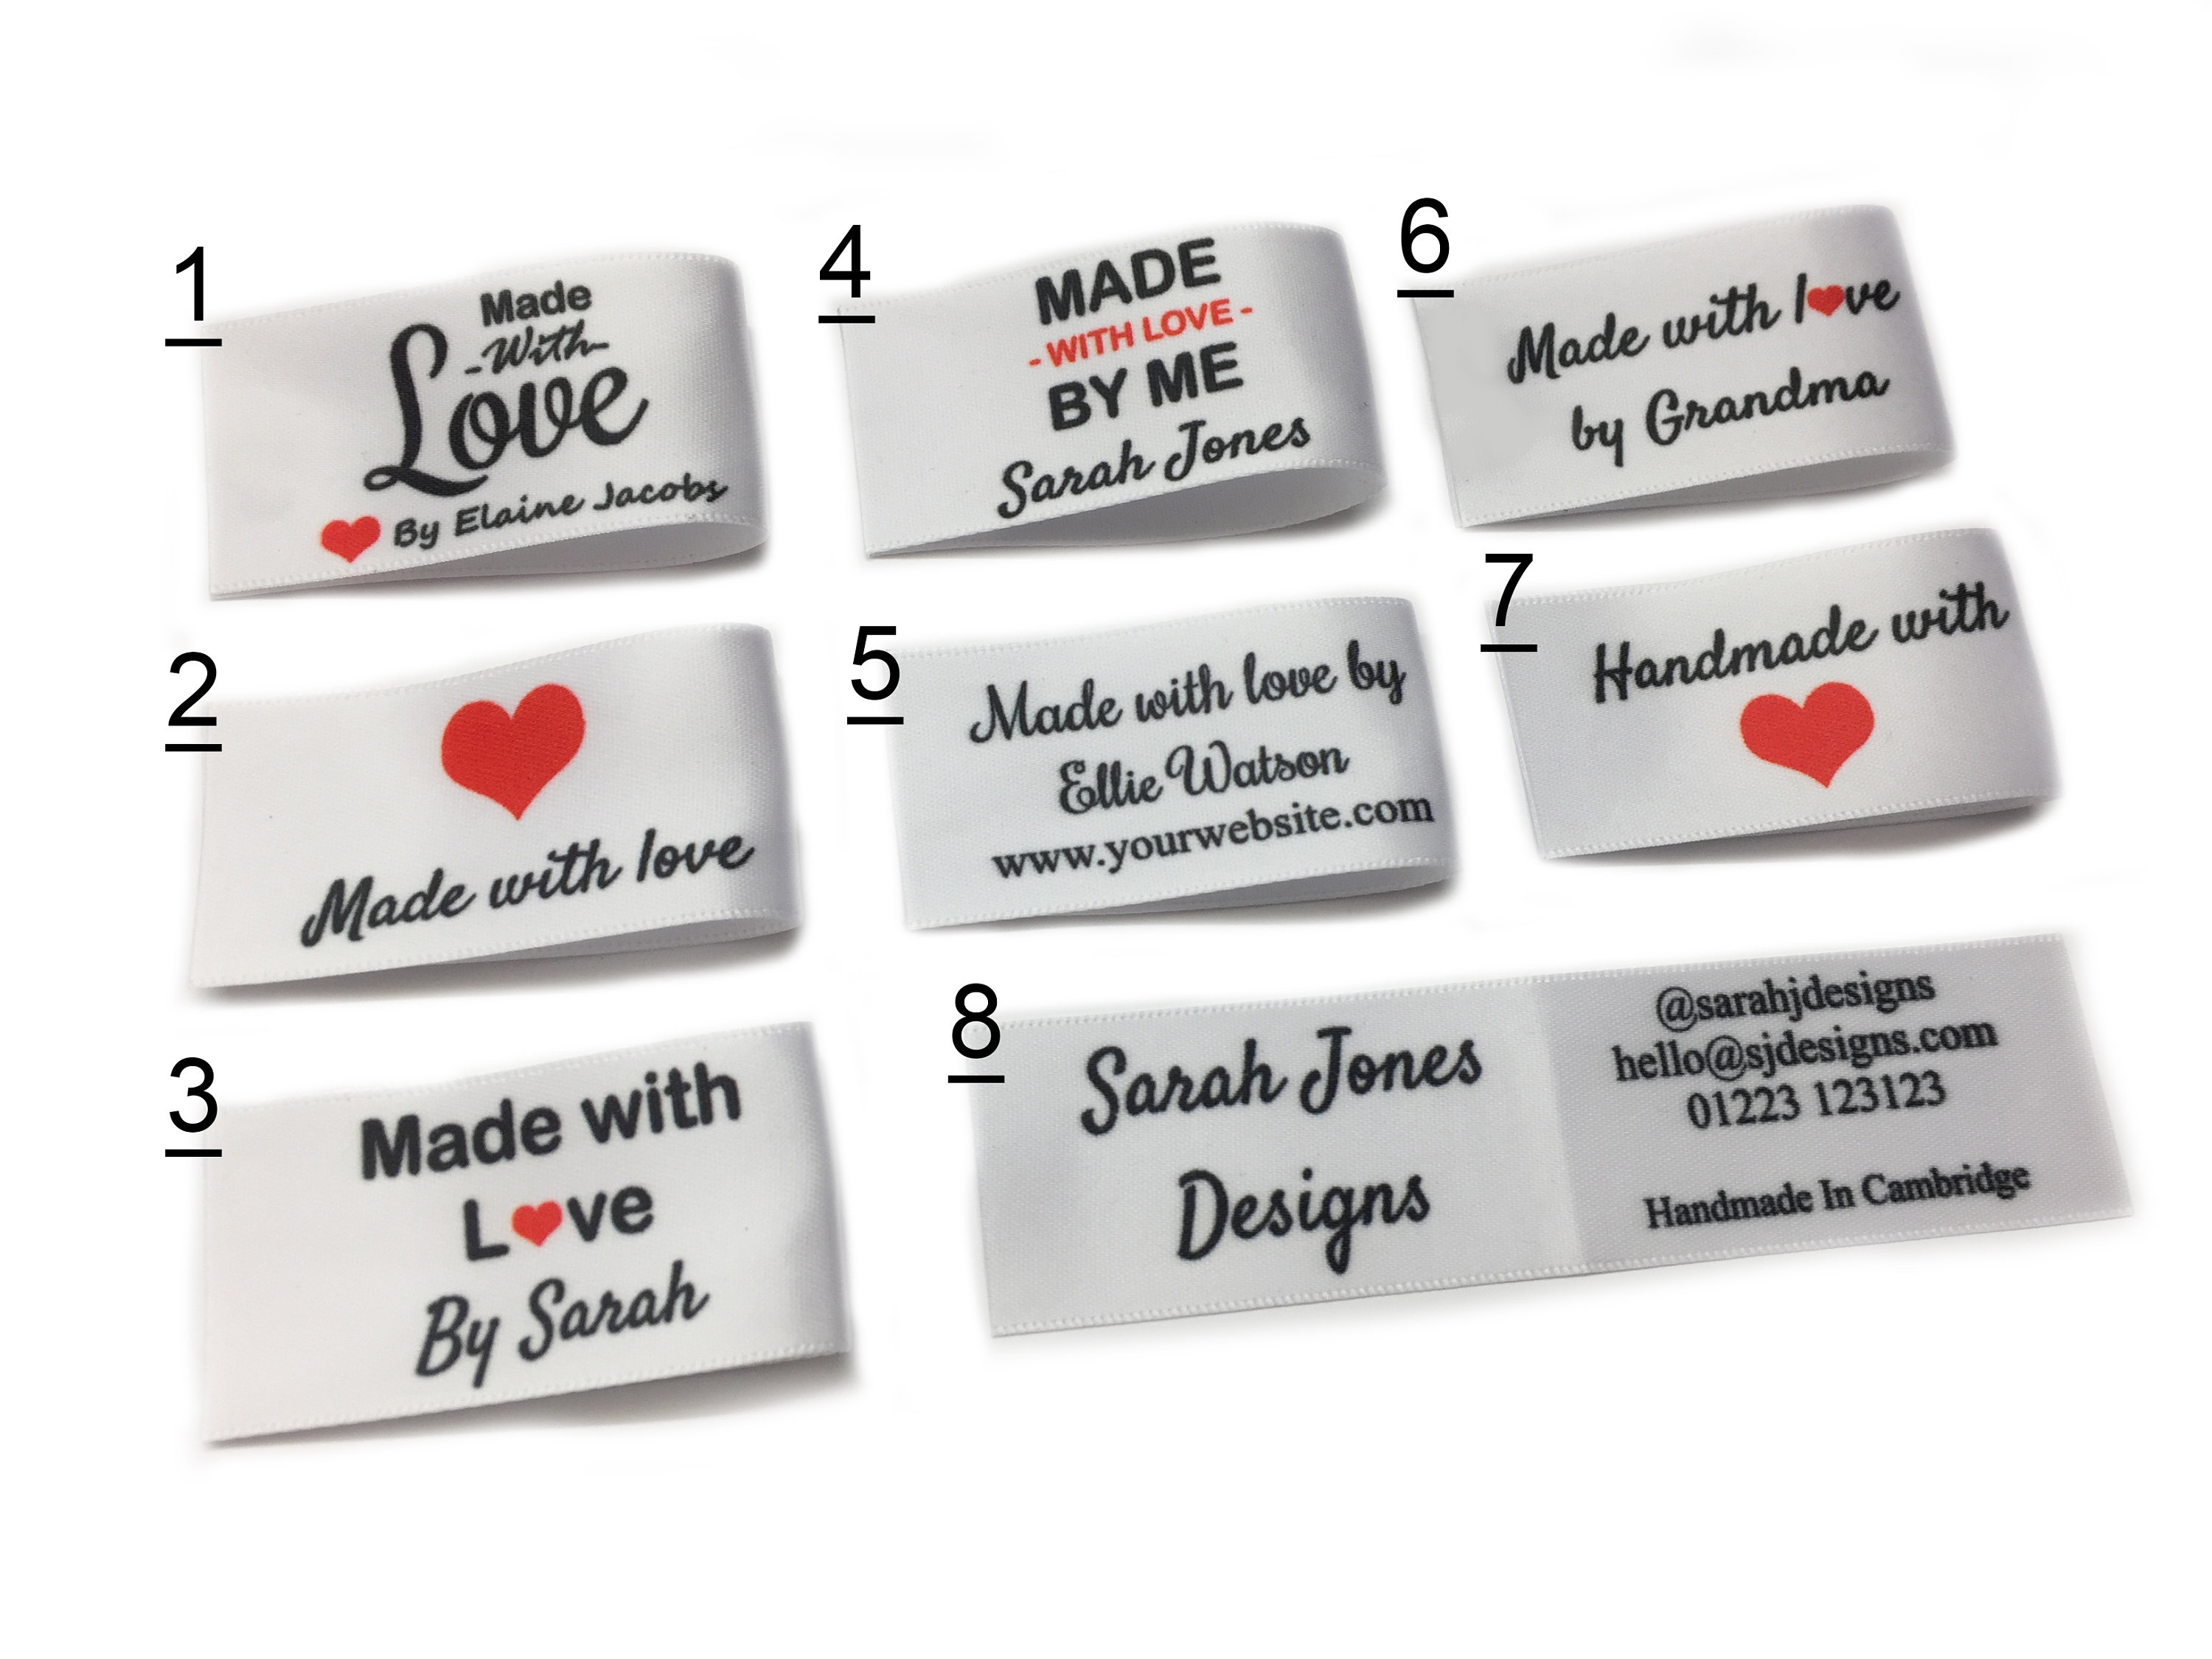 Sewn With Love Tags Printable. Made With Love Product Tags. Gift Tags for  Handmade Items. Business Tags for Sewing, Crochet, Quilt Packaging 